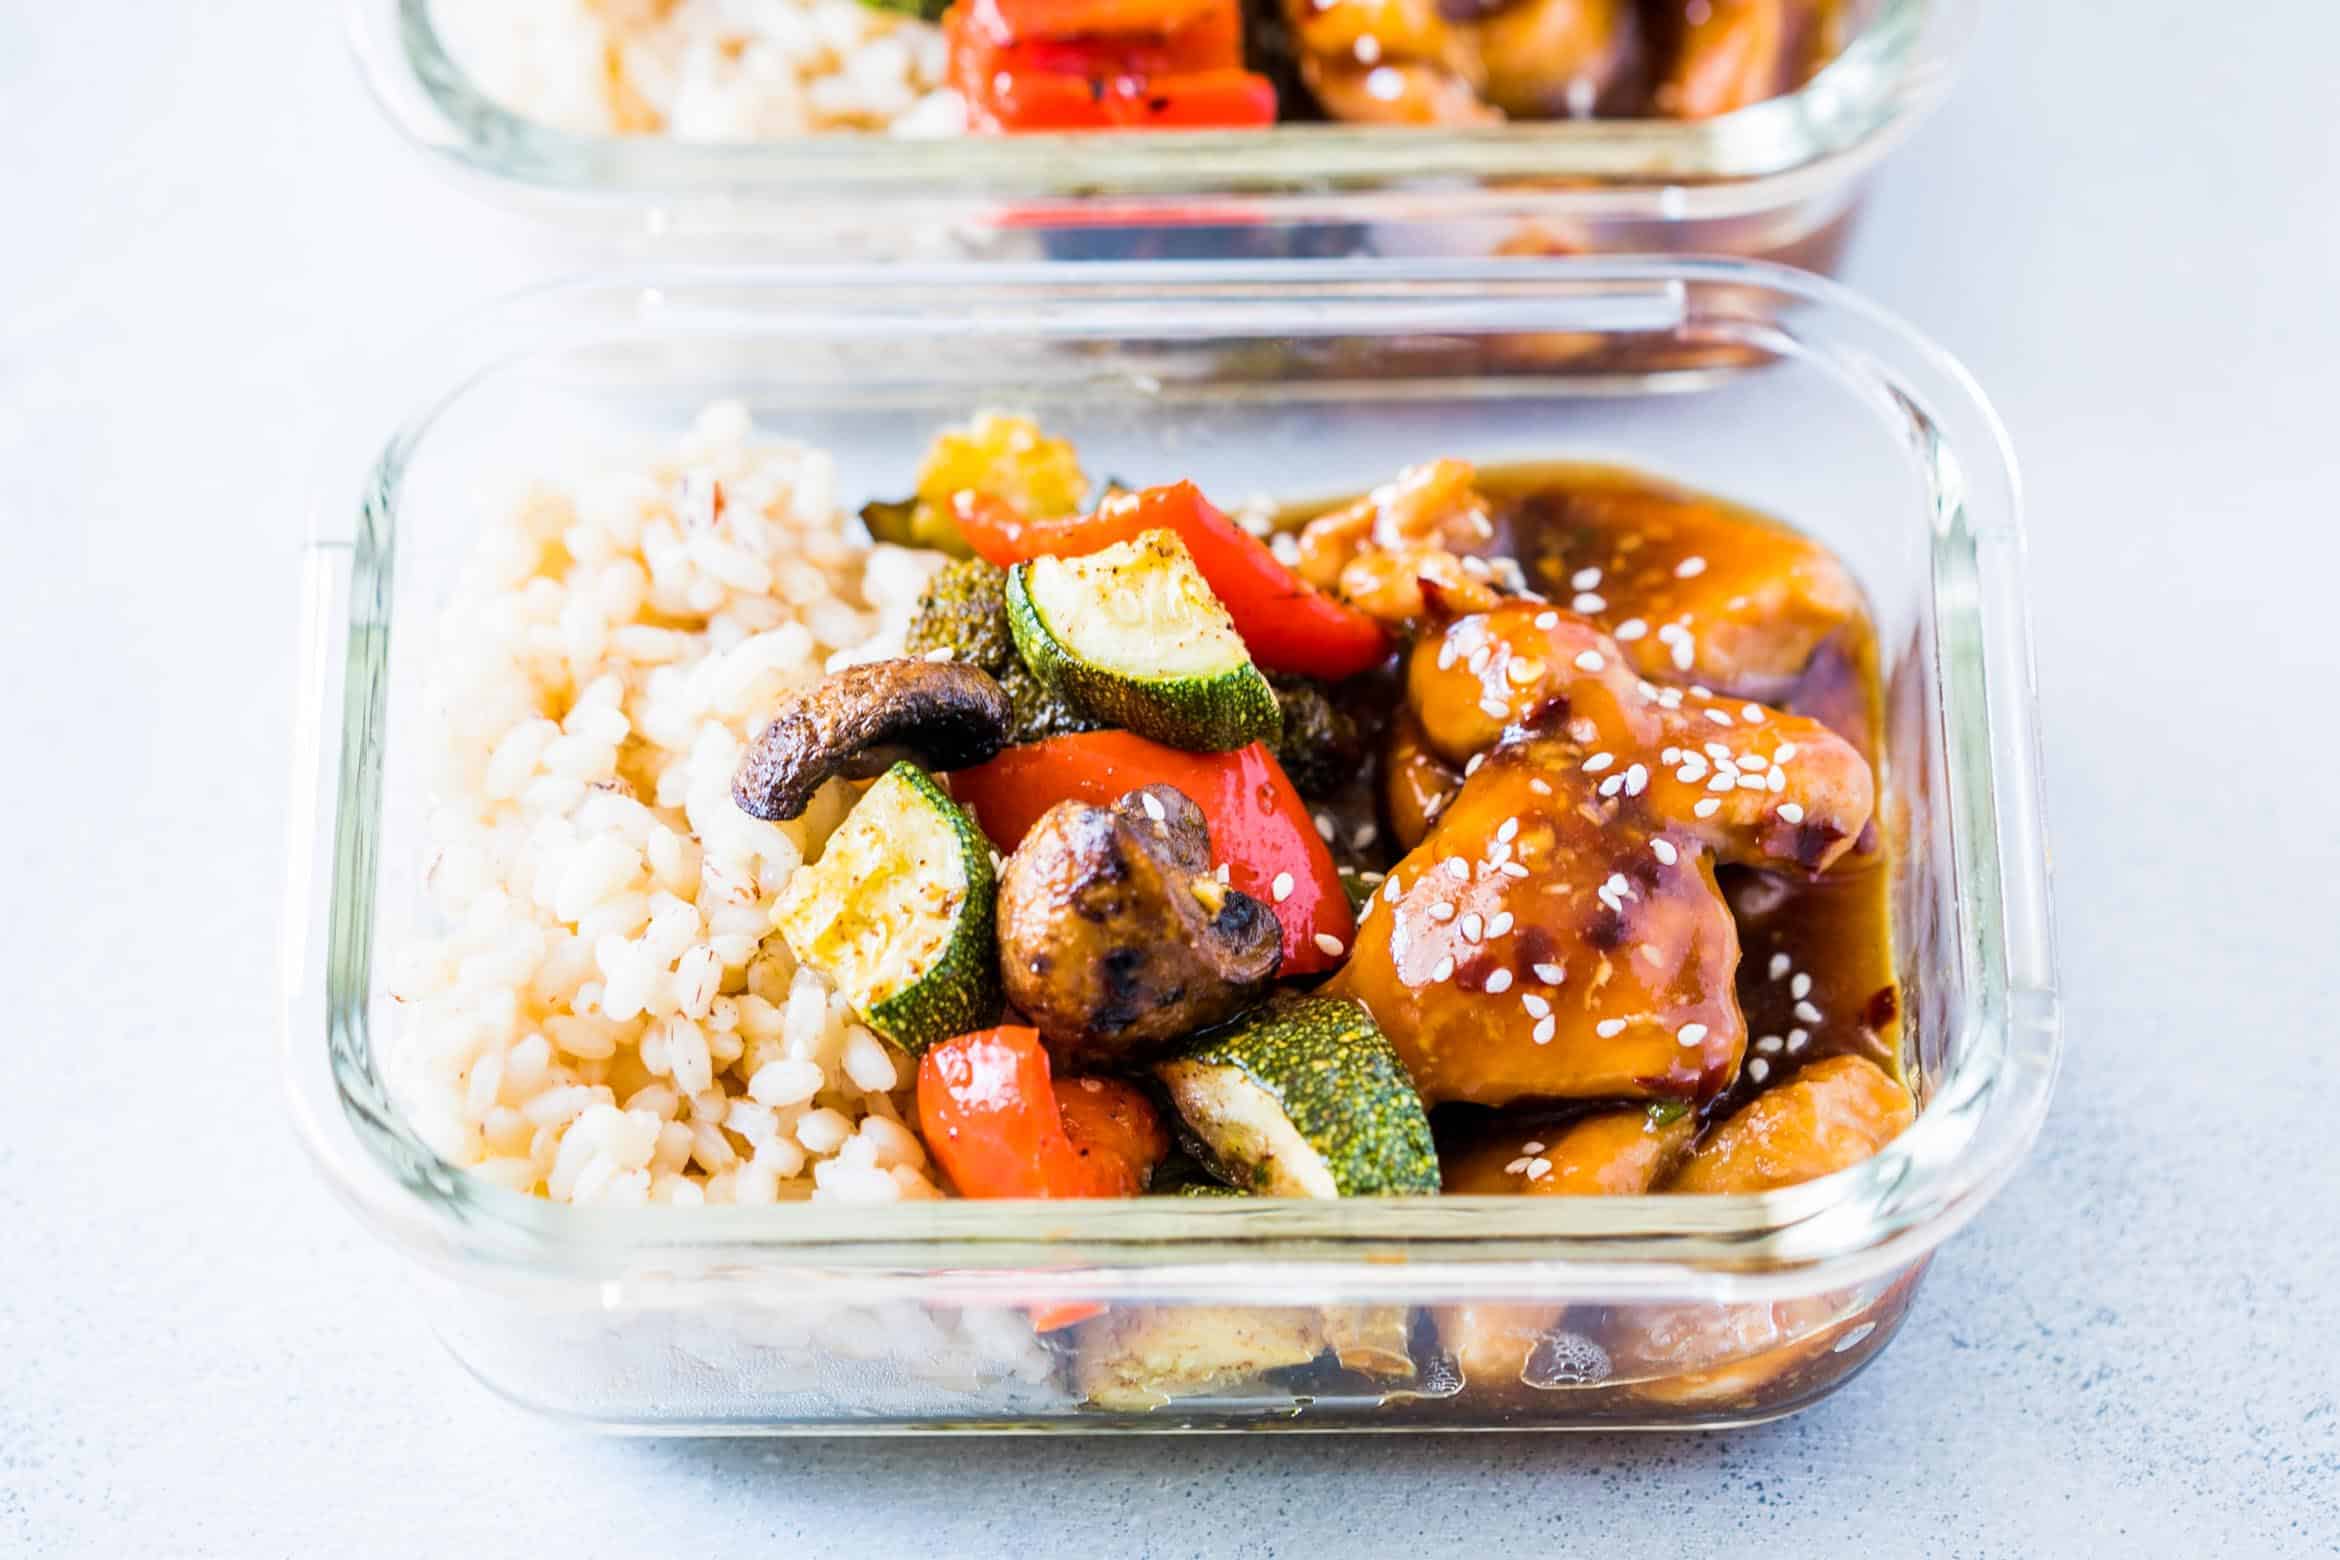 Tasty Teriyaki Chicken Stir Fry Meal Prep Lunch Boxes are the easiest way to make sure you are ready for the work week ahead. Served with brown rice and grilled vegetables, it's a balanced meal!